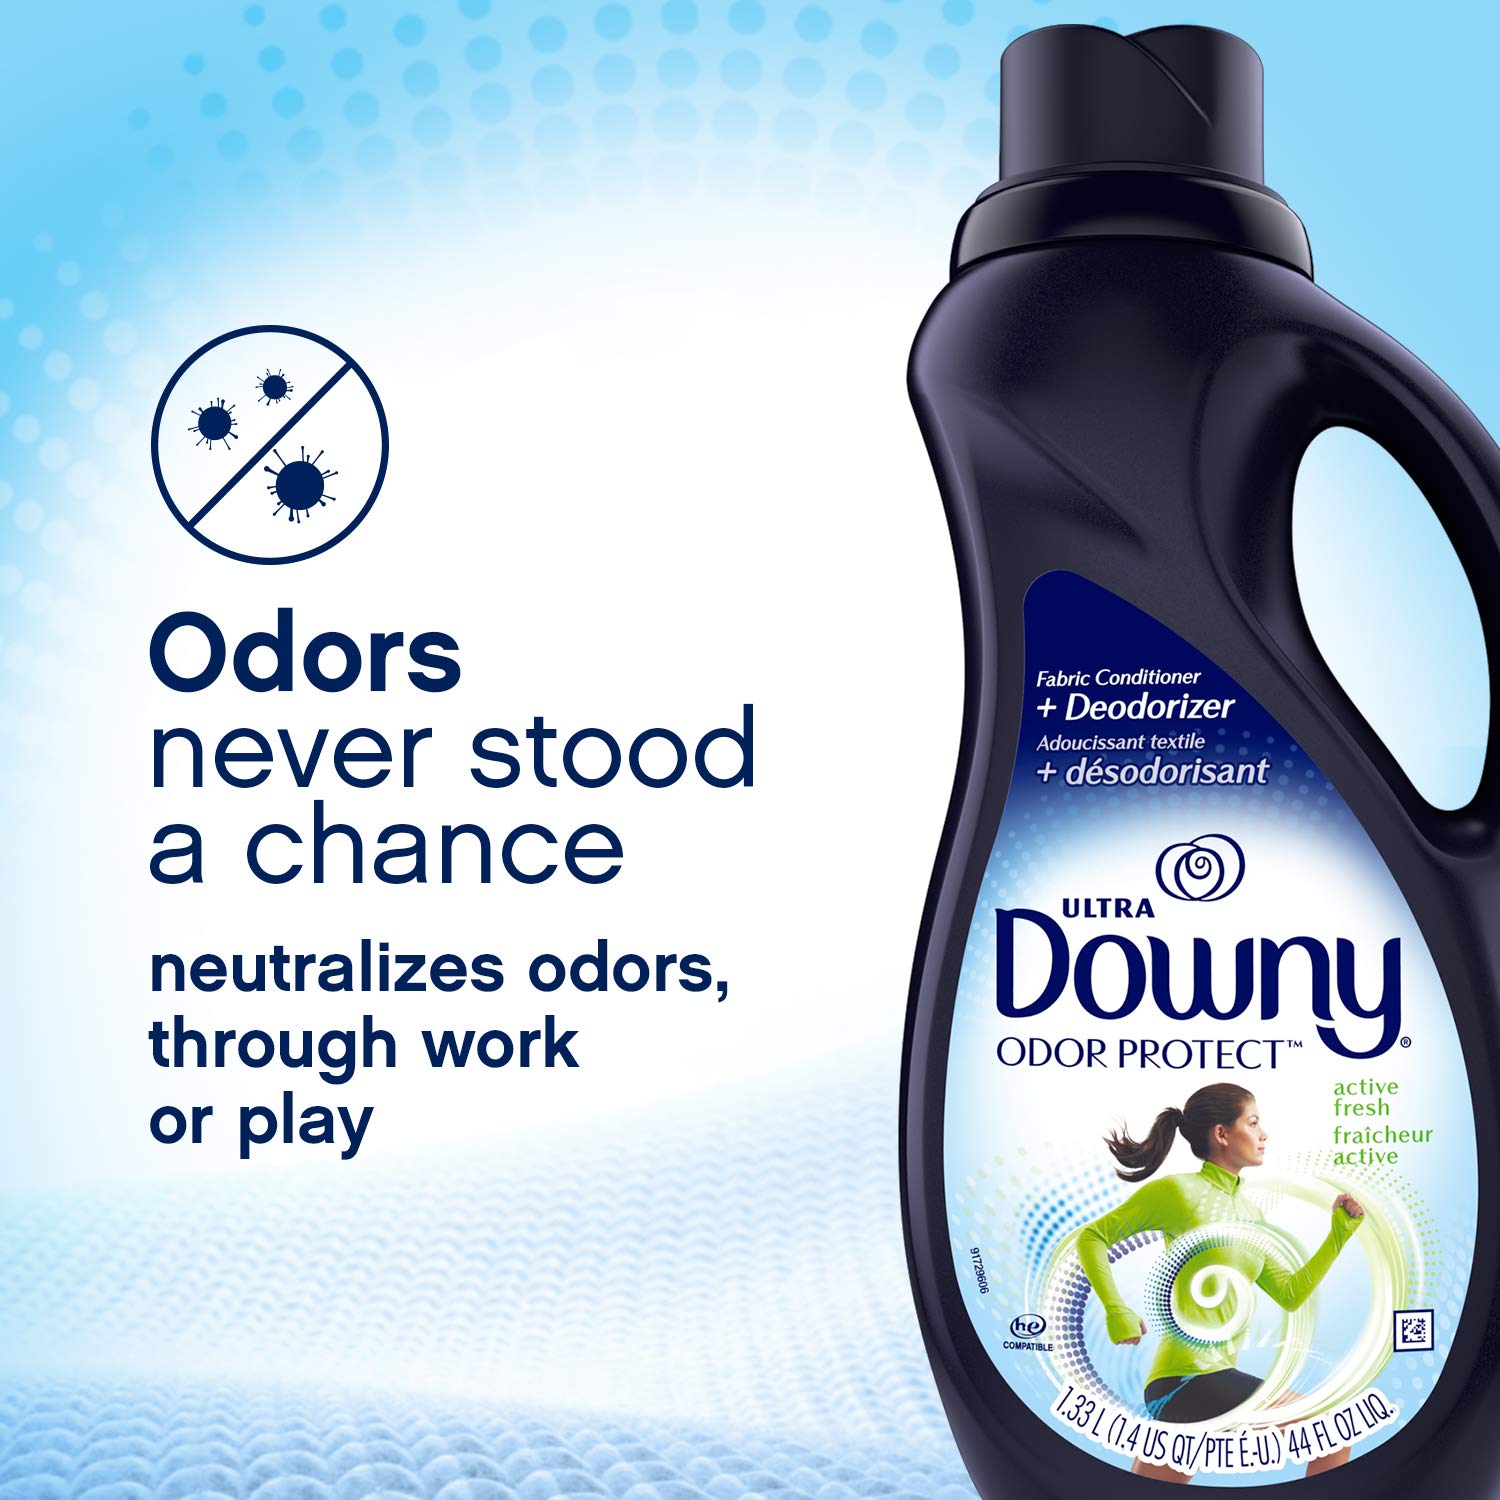 Downy Odor Protect Fabric Deodorizer and Fabric Conditioner, Active Fresh, 32 fl oz, Packaging May Vary : Health & Household